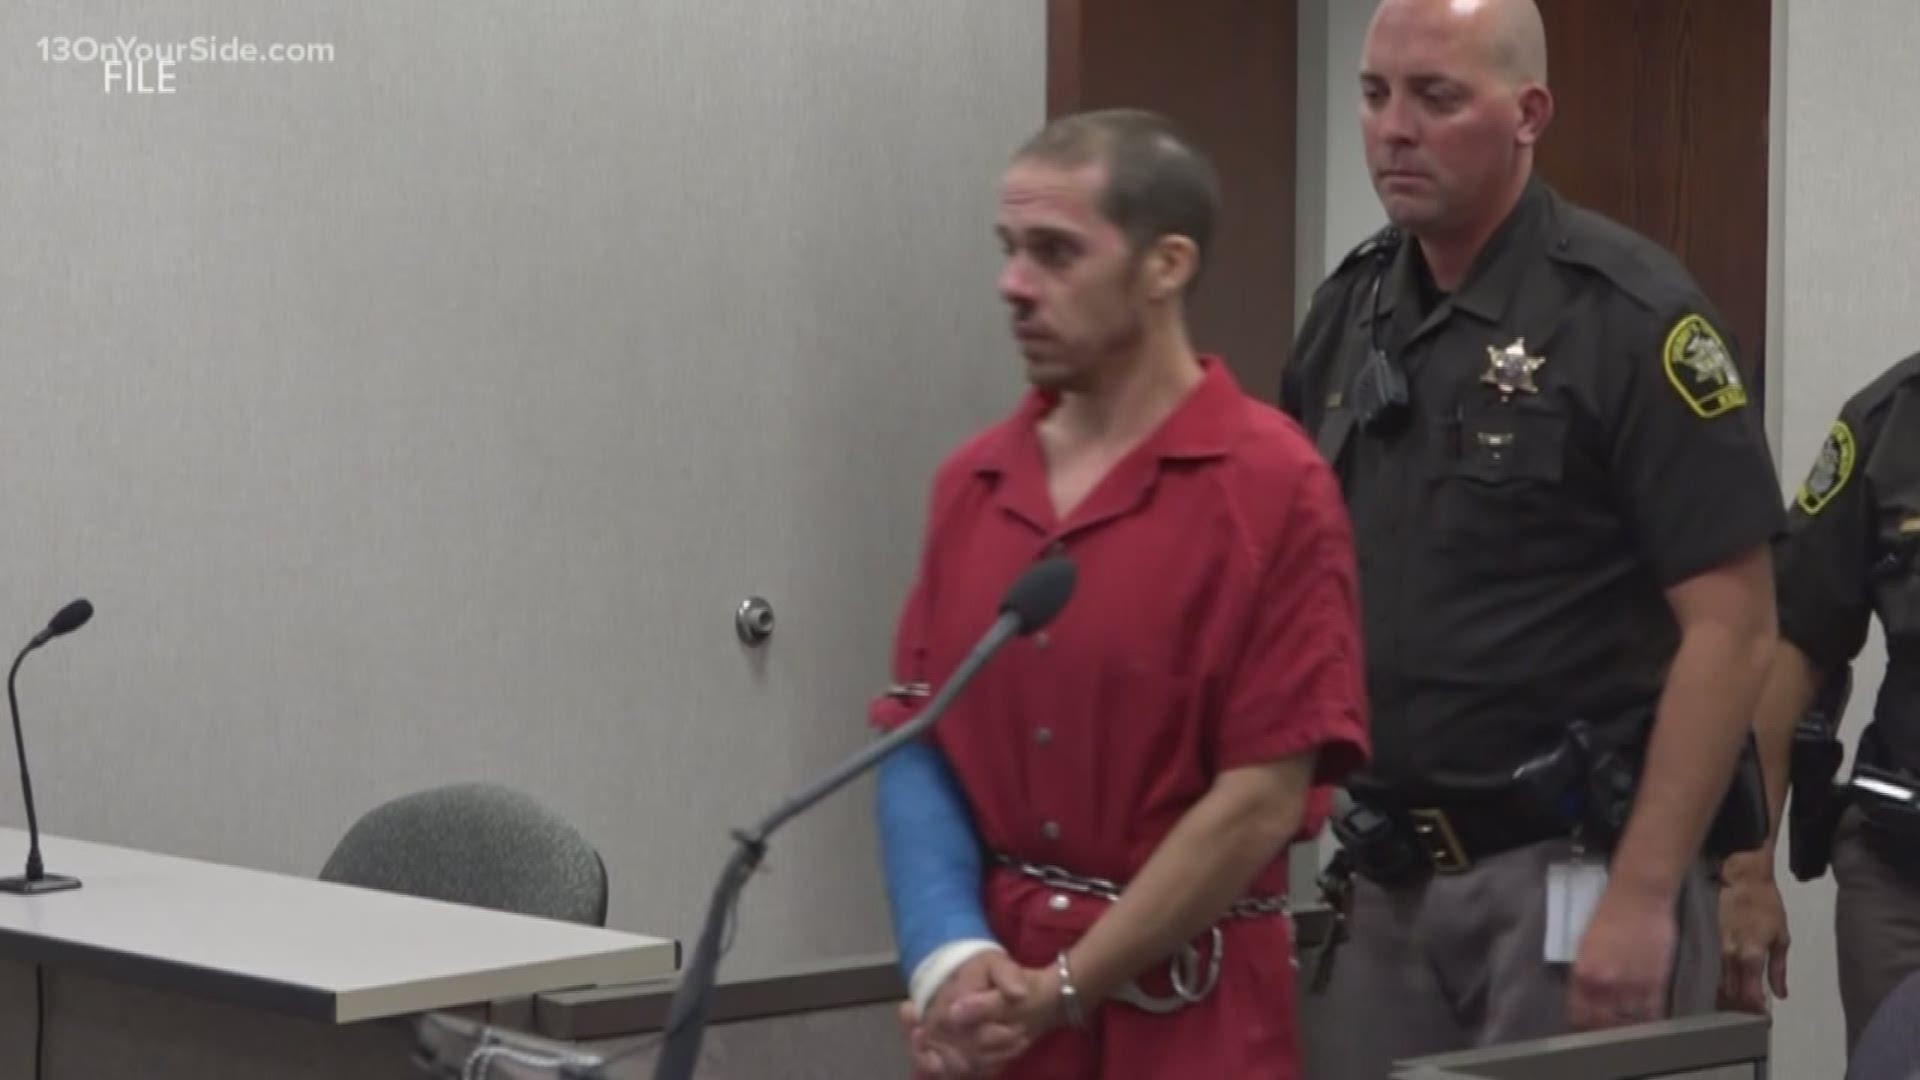 Opening statements for the trial against Adam Nolin, a 33-year-old Grand Rapids man accused of shooting and killing his girlfriend back in September 2018 before leading police on a chase that ended on the S-curve of US-131.